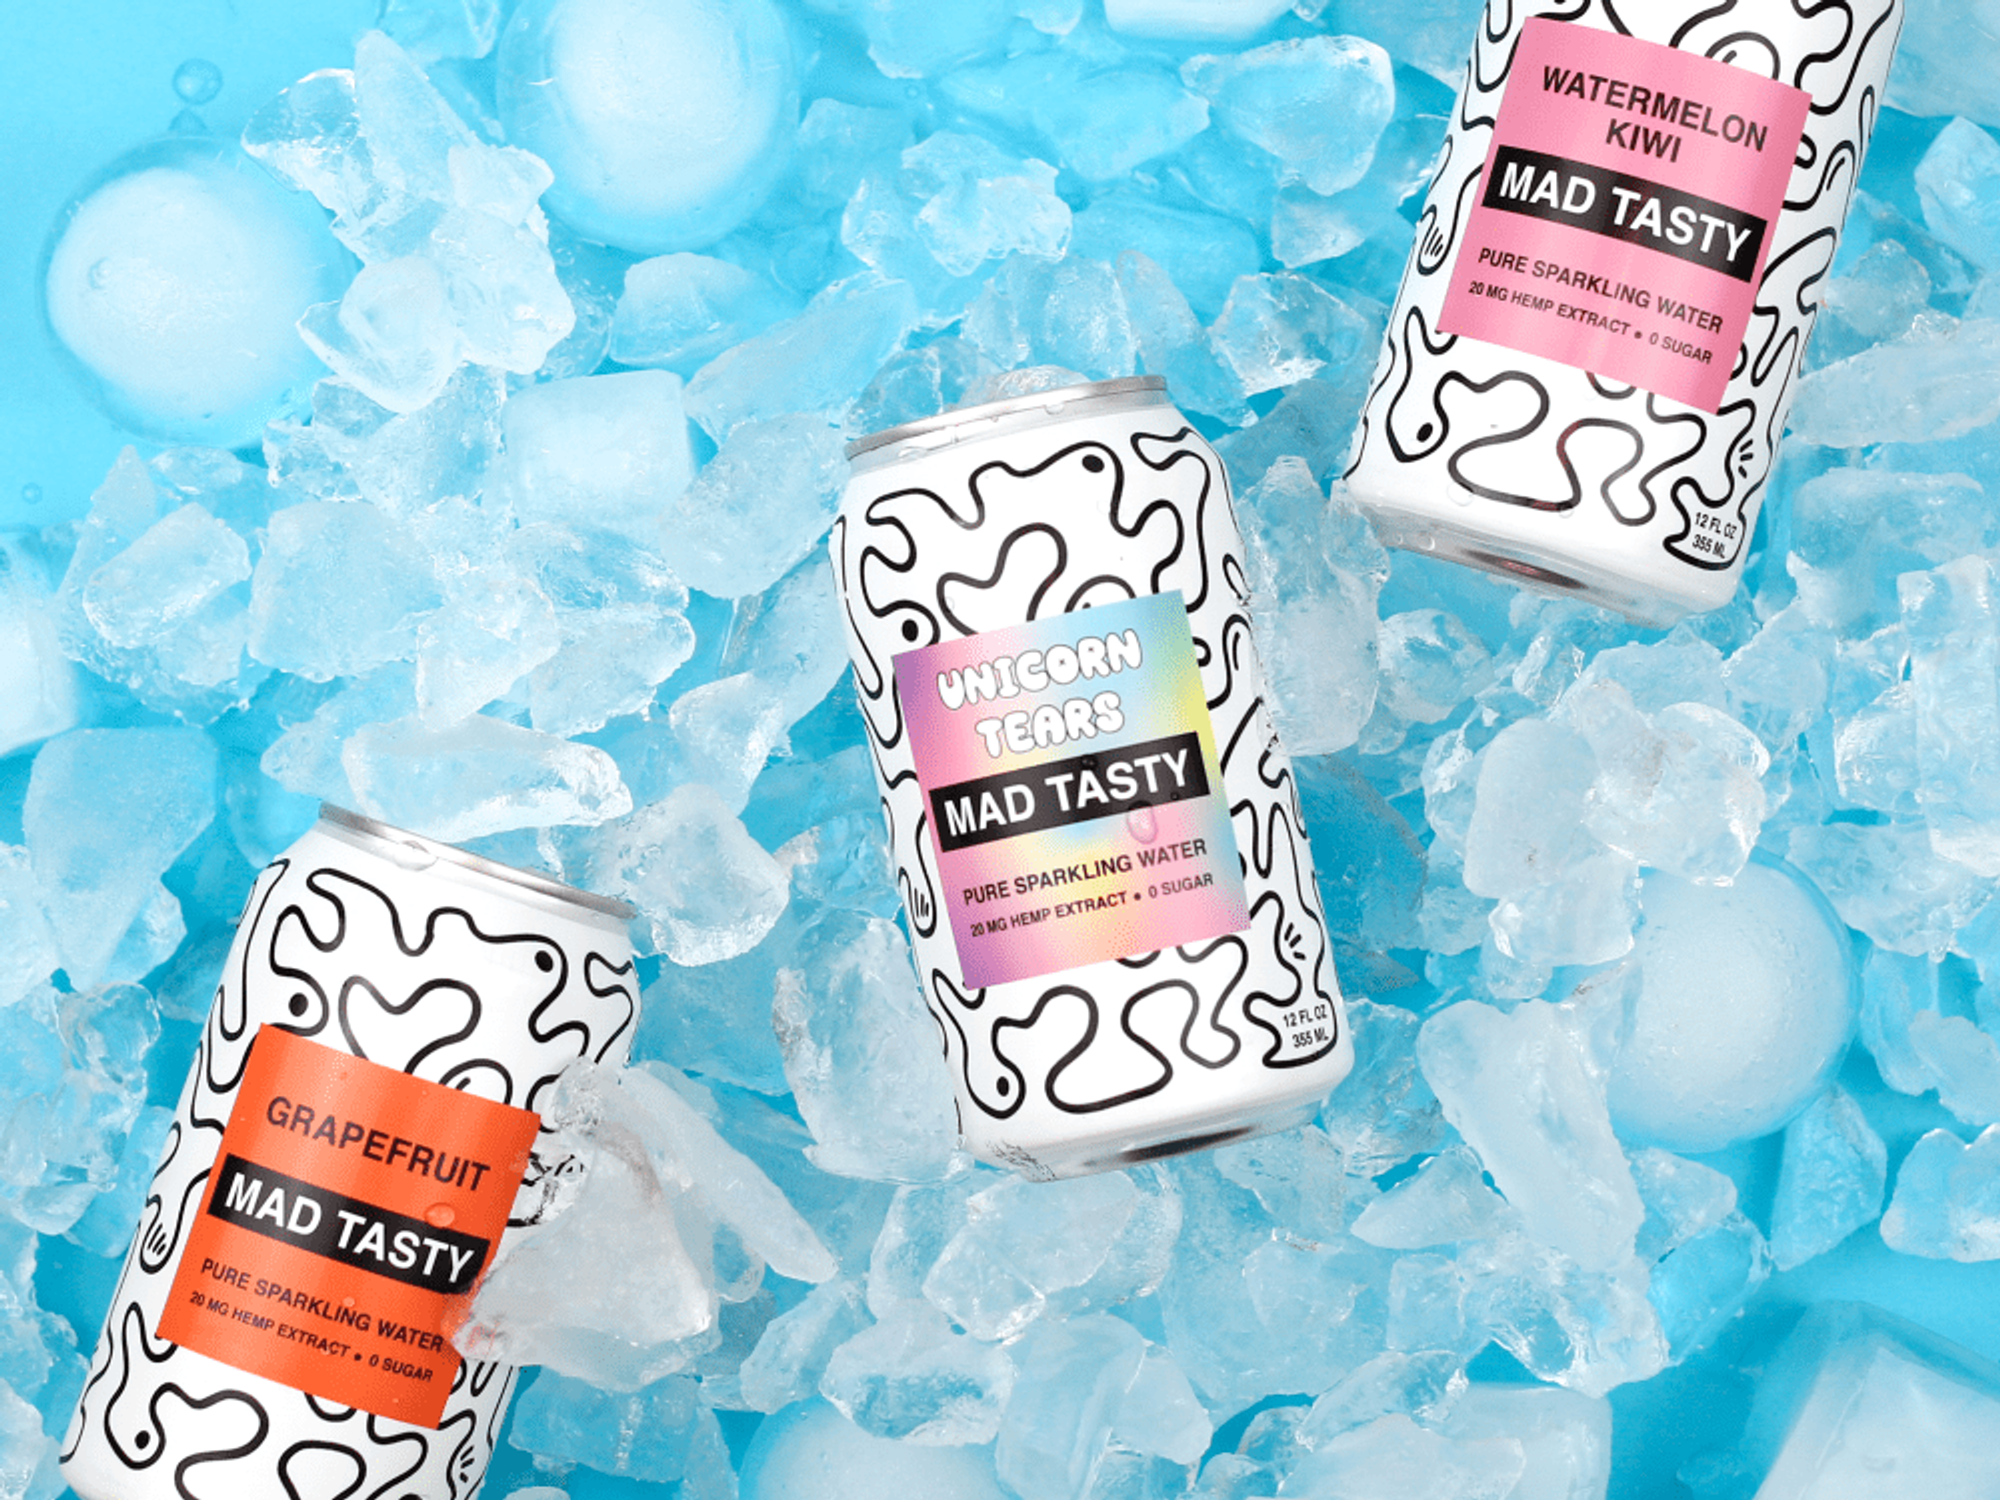 Mad Tasty seltzer cans